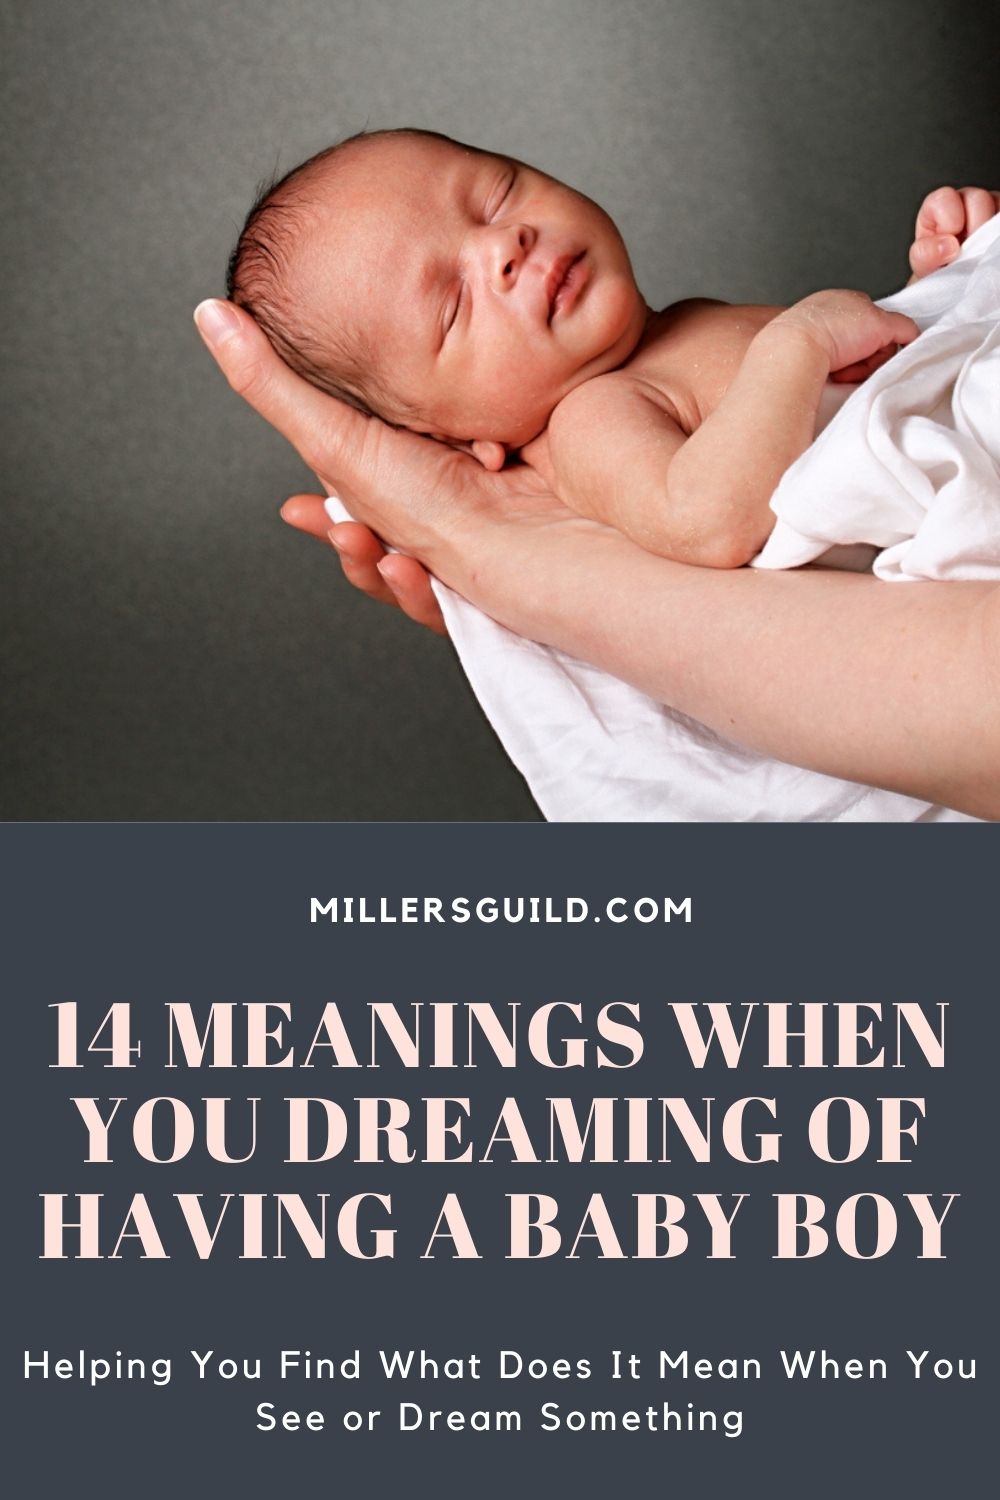 14 Meanings When You Dreaming of Having a Baby Boy 2